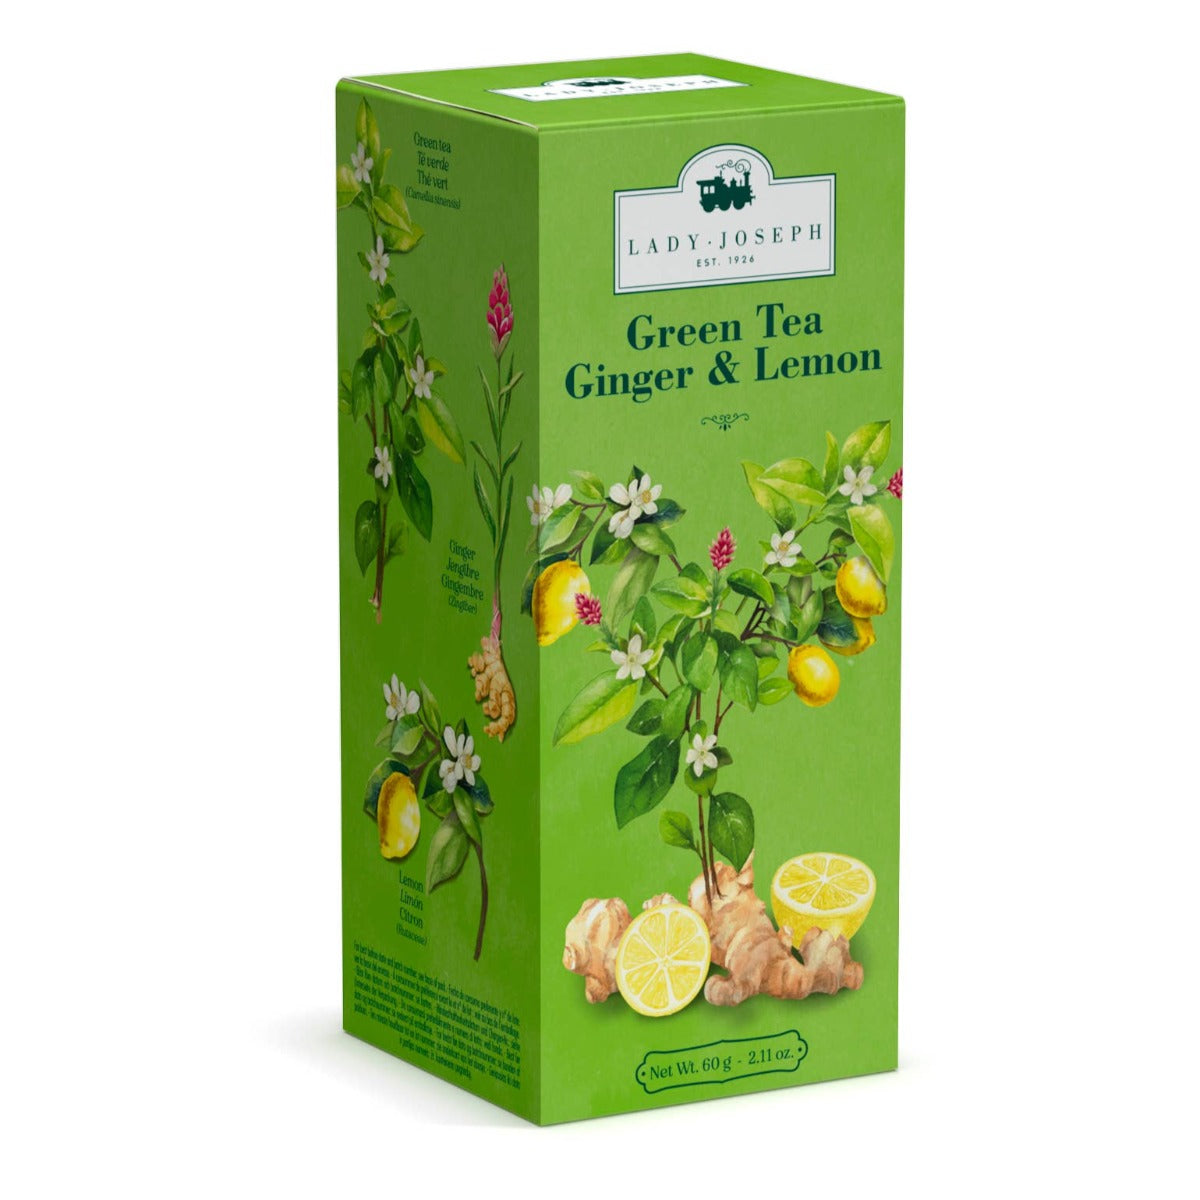 Green tea with ginger and lemon, lady joseph, olive and basket